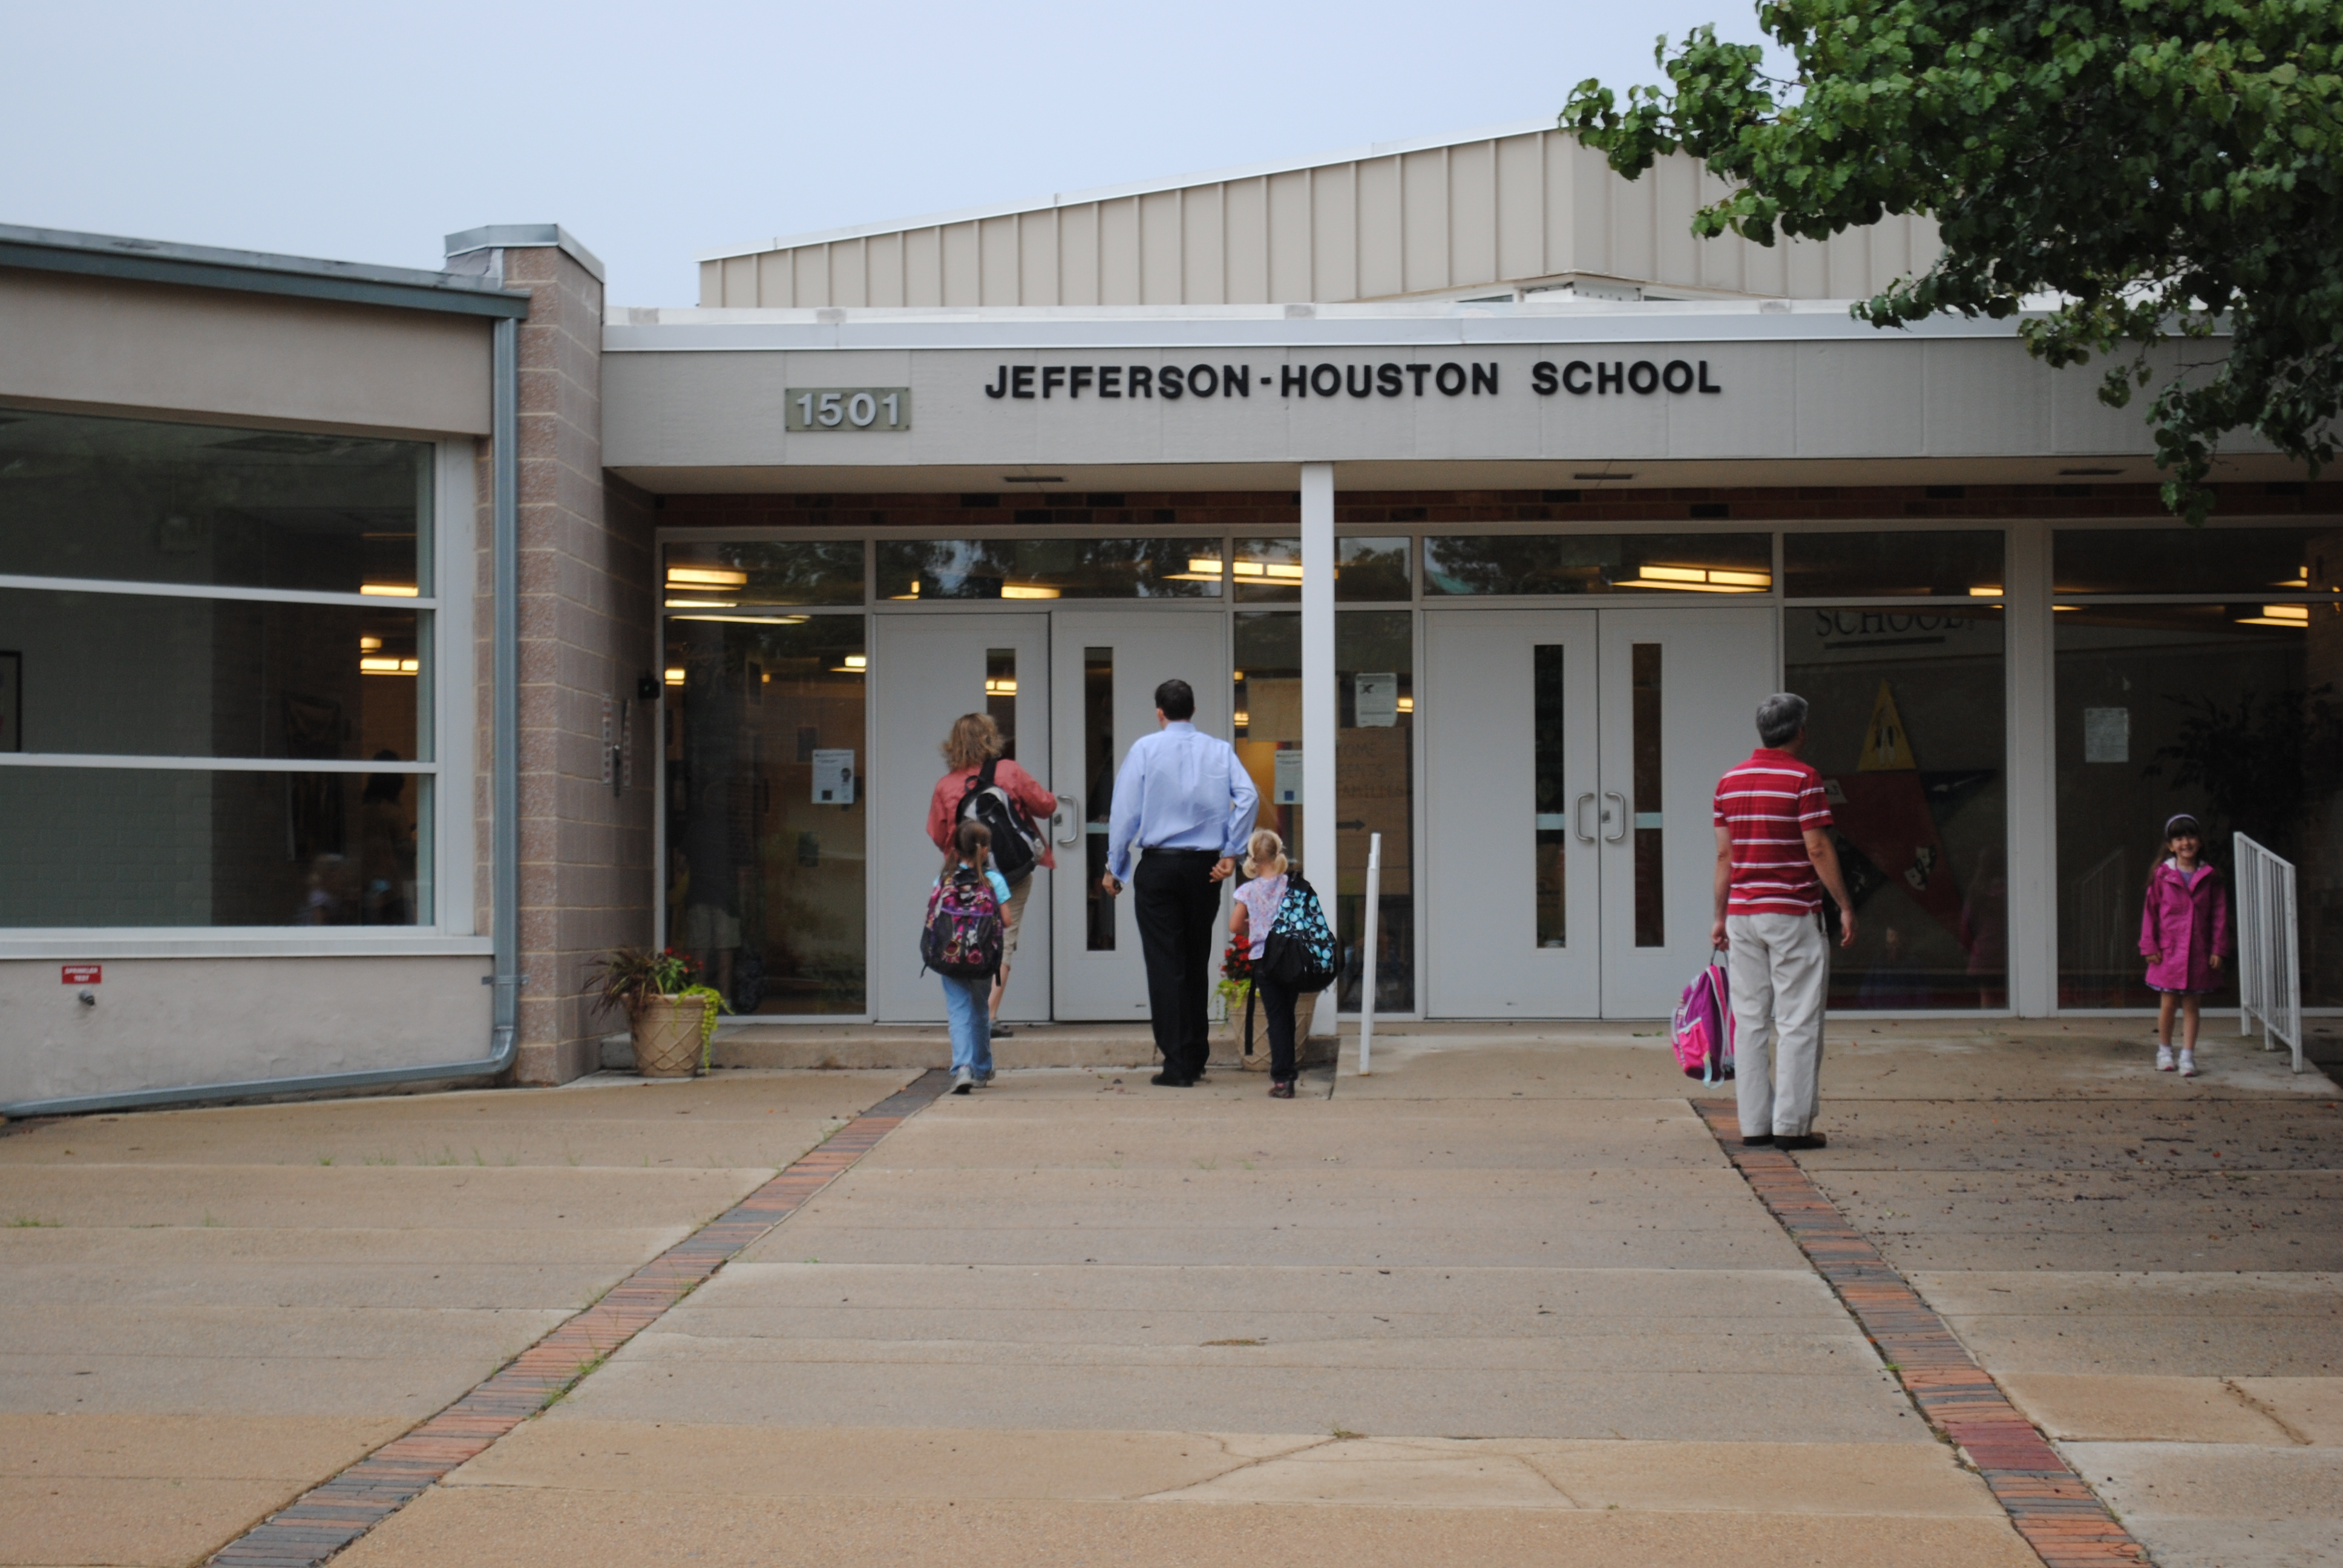 A thousand thanks for supporting Jefferson-Houston